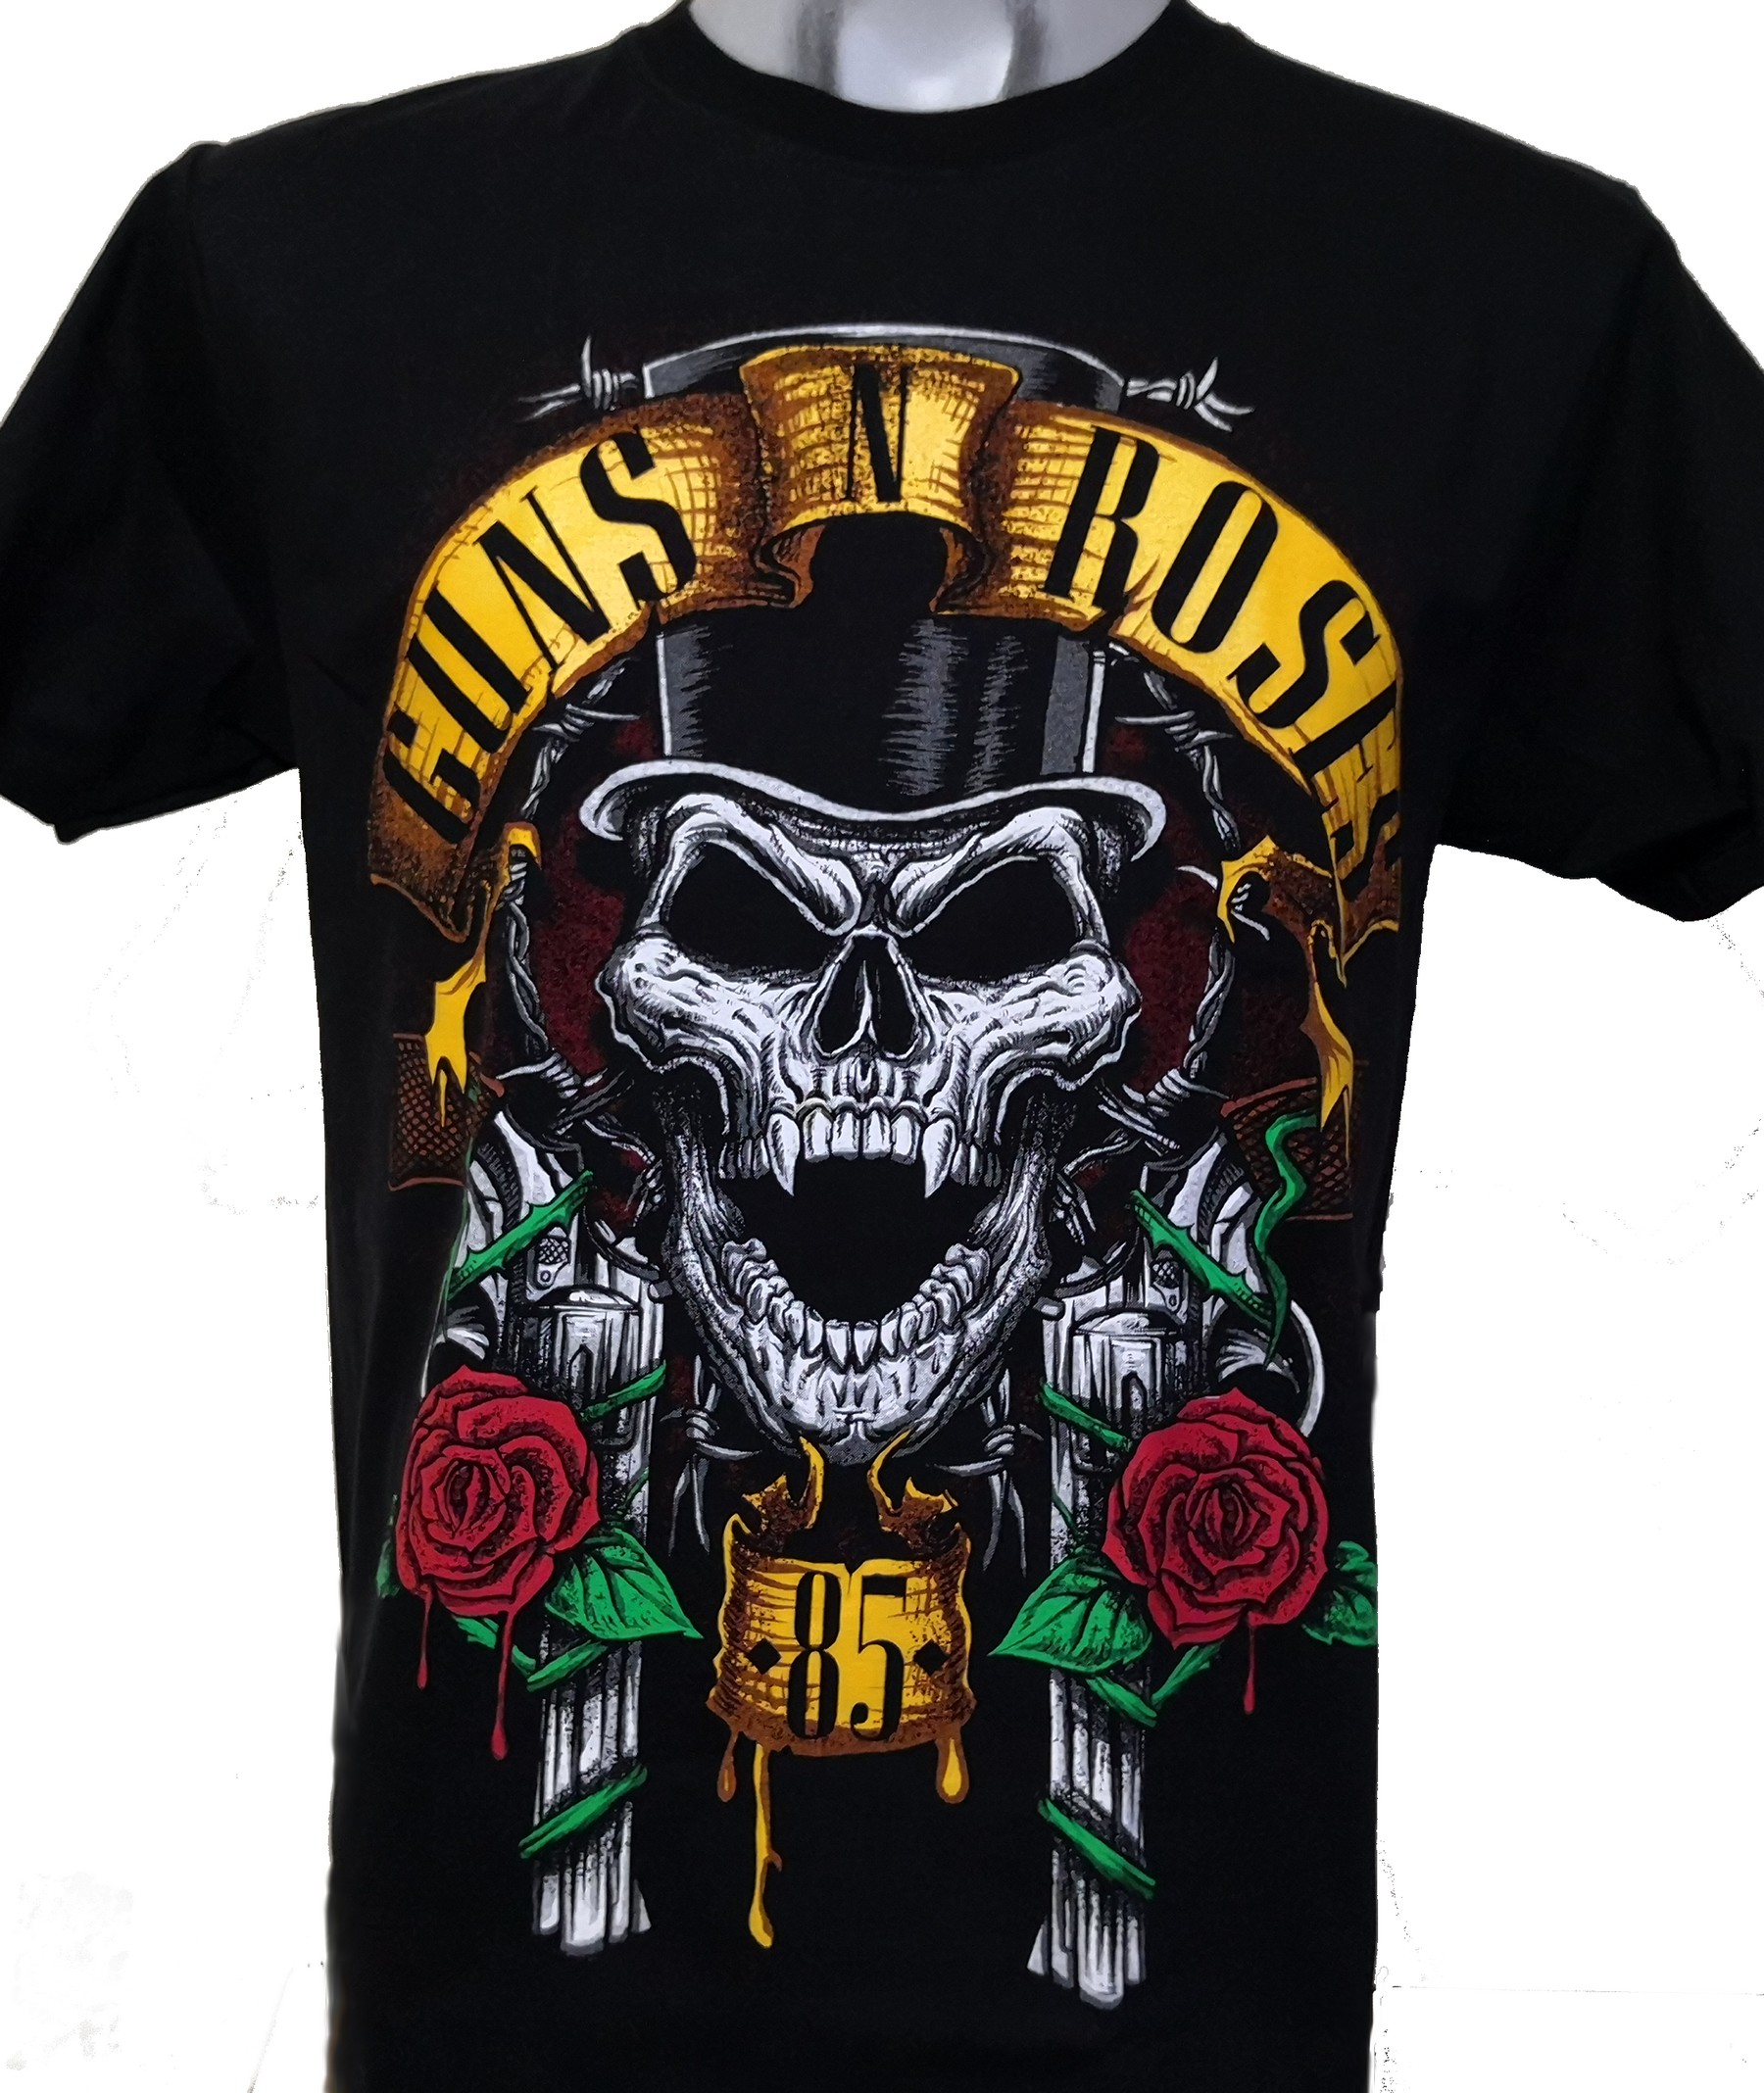 A Complete Guide To Buying The Perfect Guns N Roses Shirt - cartoomics